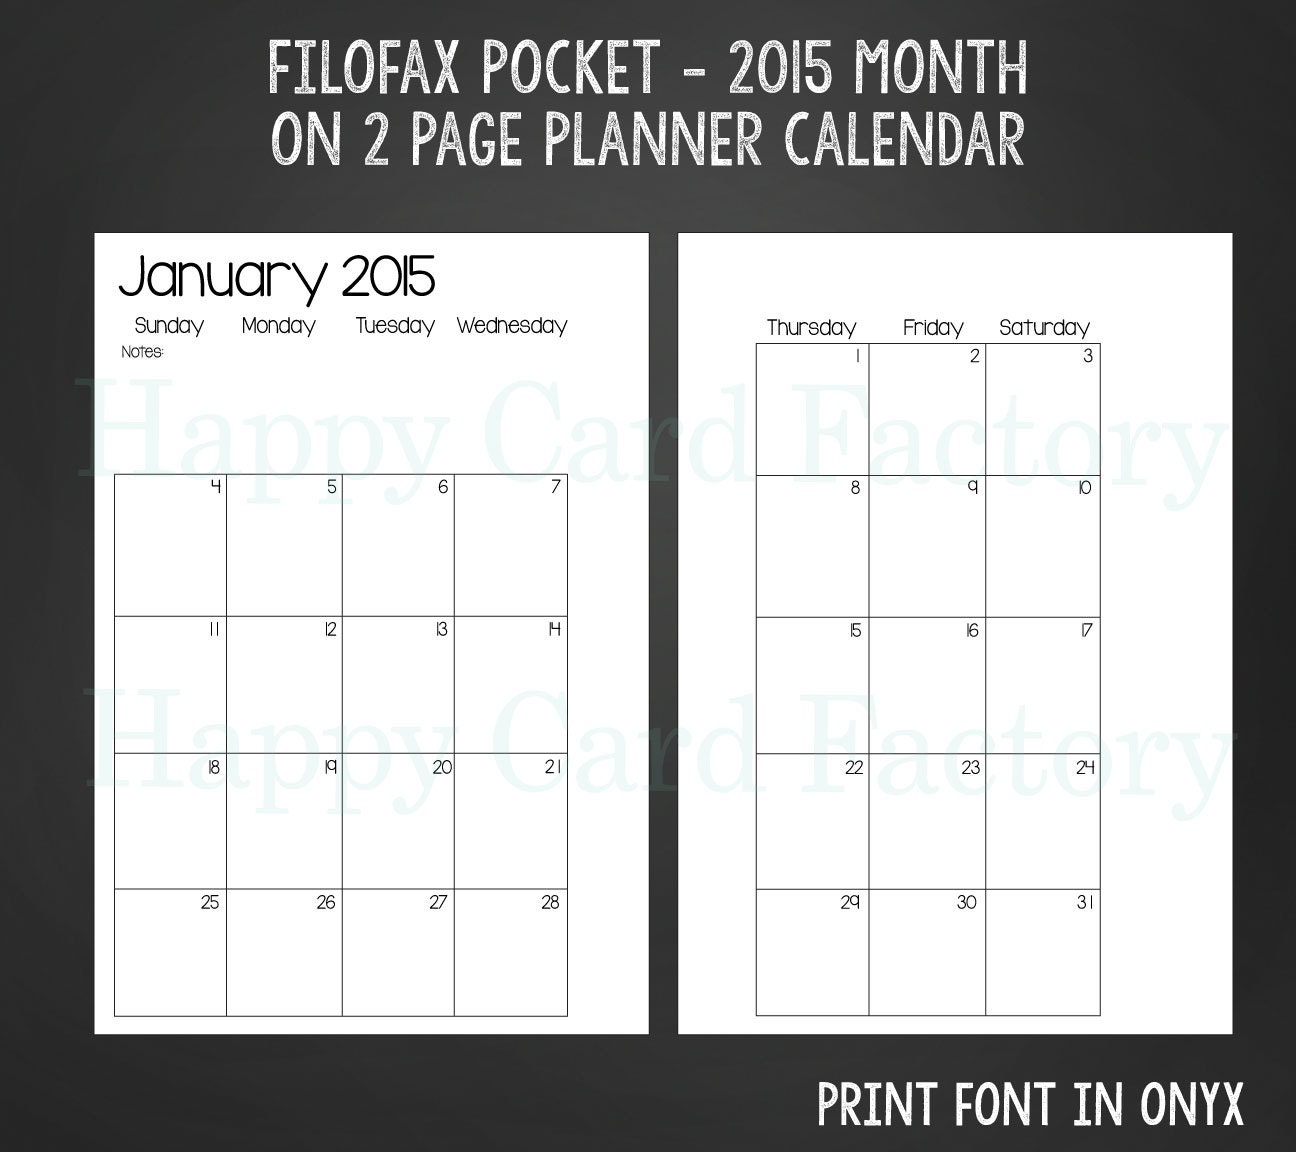 Pocket Size 2015 Monthly Planner Calendar by HappyCardFactory